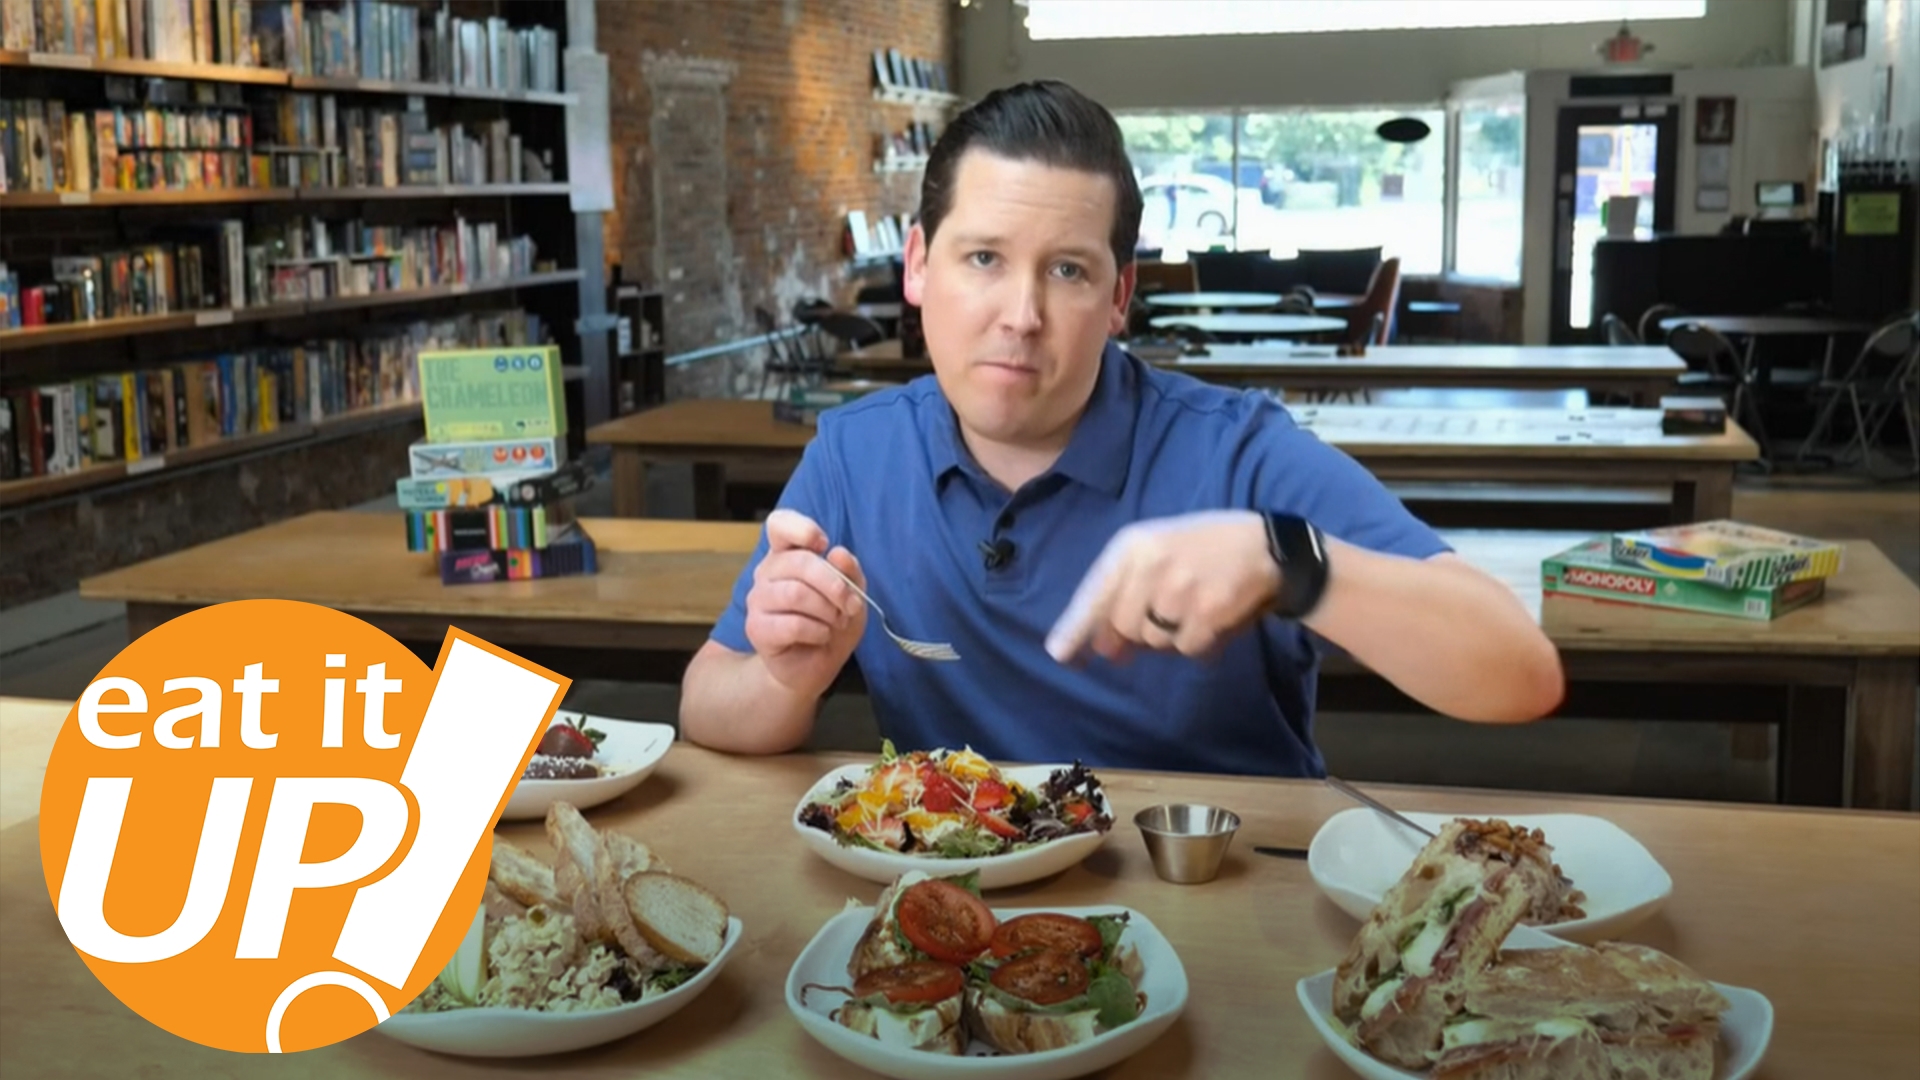 On this week's Eat It Up, Hayden Balgavy visits Caverns & Forests Board Game Café in North Little Rock, a one-of-a-kind spot to gather for food & fun with friends.